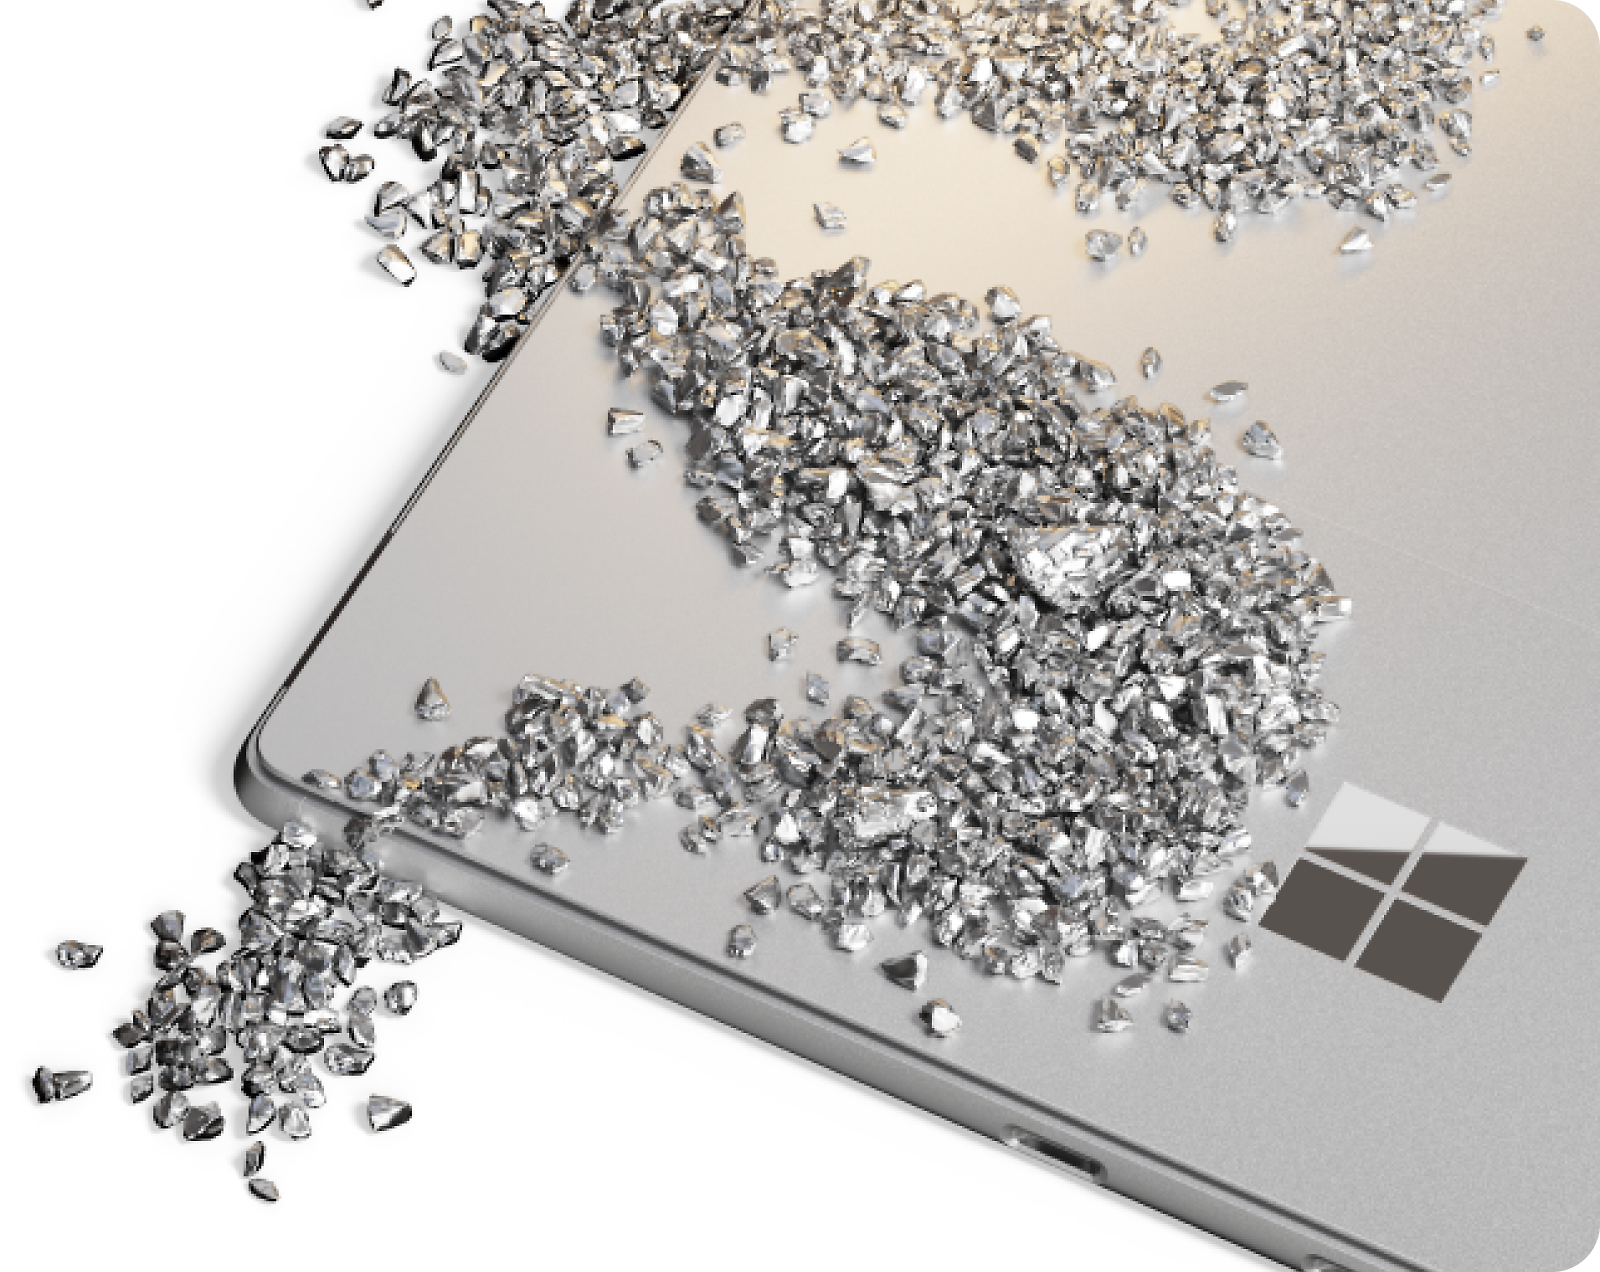 A close-up image of a silver laptop with a Microsoft logo, covered in and surrounded by small scattered pieces of reflective metal